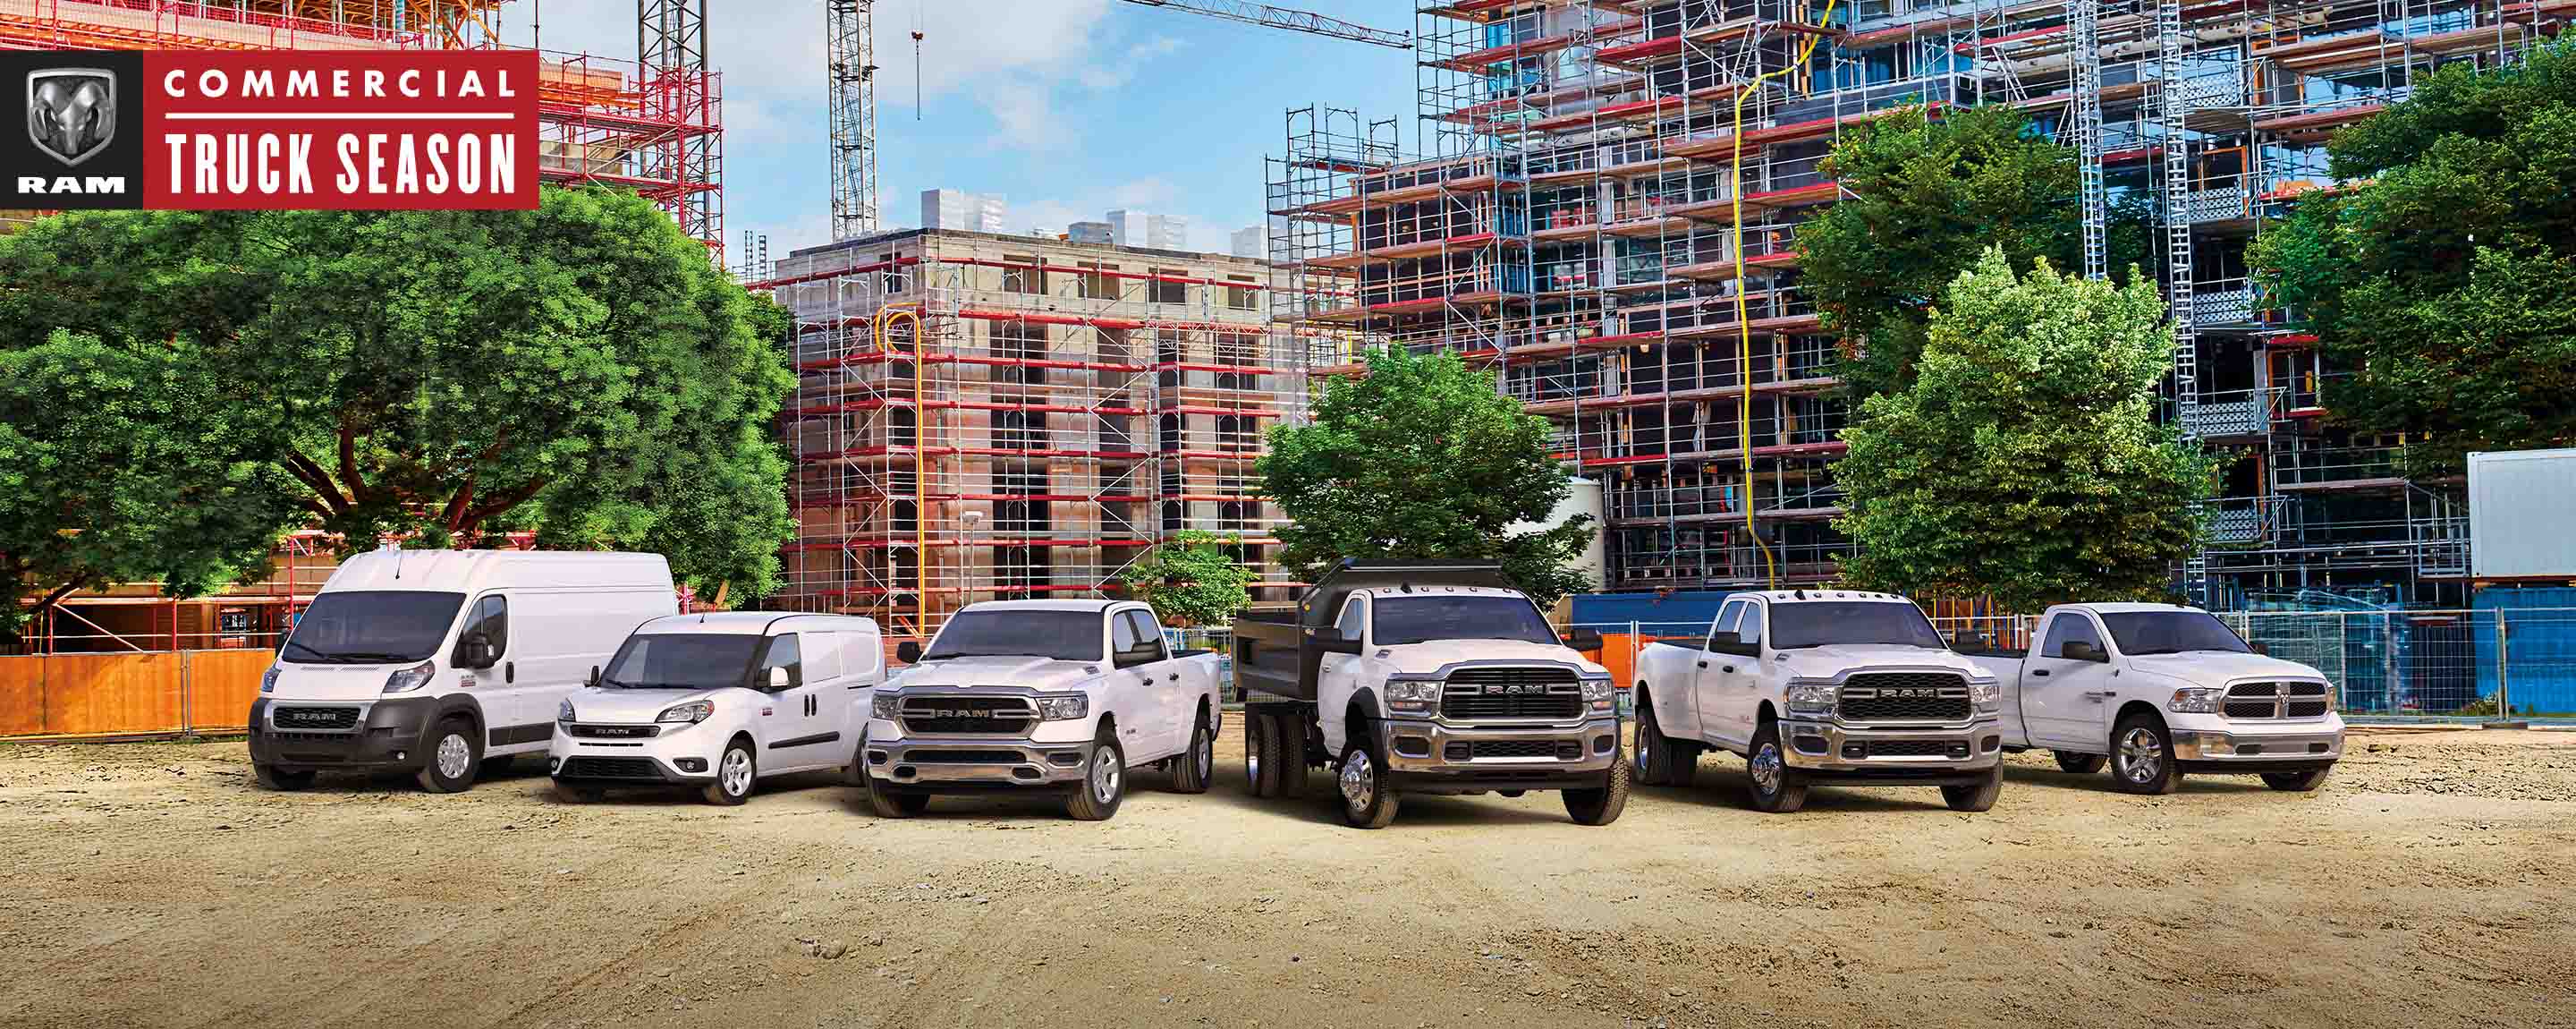 Ram Commercial Truck season. The 2021 Ram lineup parked at a massive commercial construction site. From left to right: a Ram ProMaster High Roof, Ram ProMaster City Cargo Van, Ram 1500, Ram 5500 Chassis Cab with dump body, Ram 3500 and Ram 1500 Classic.